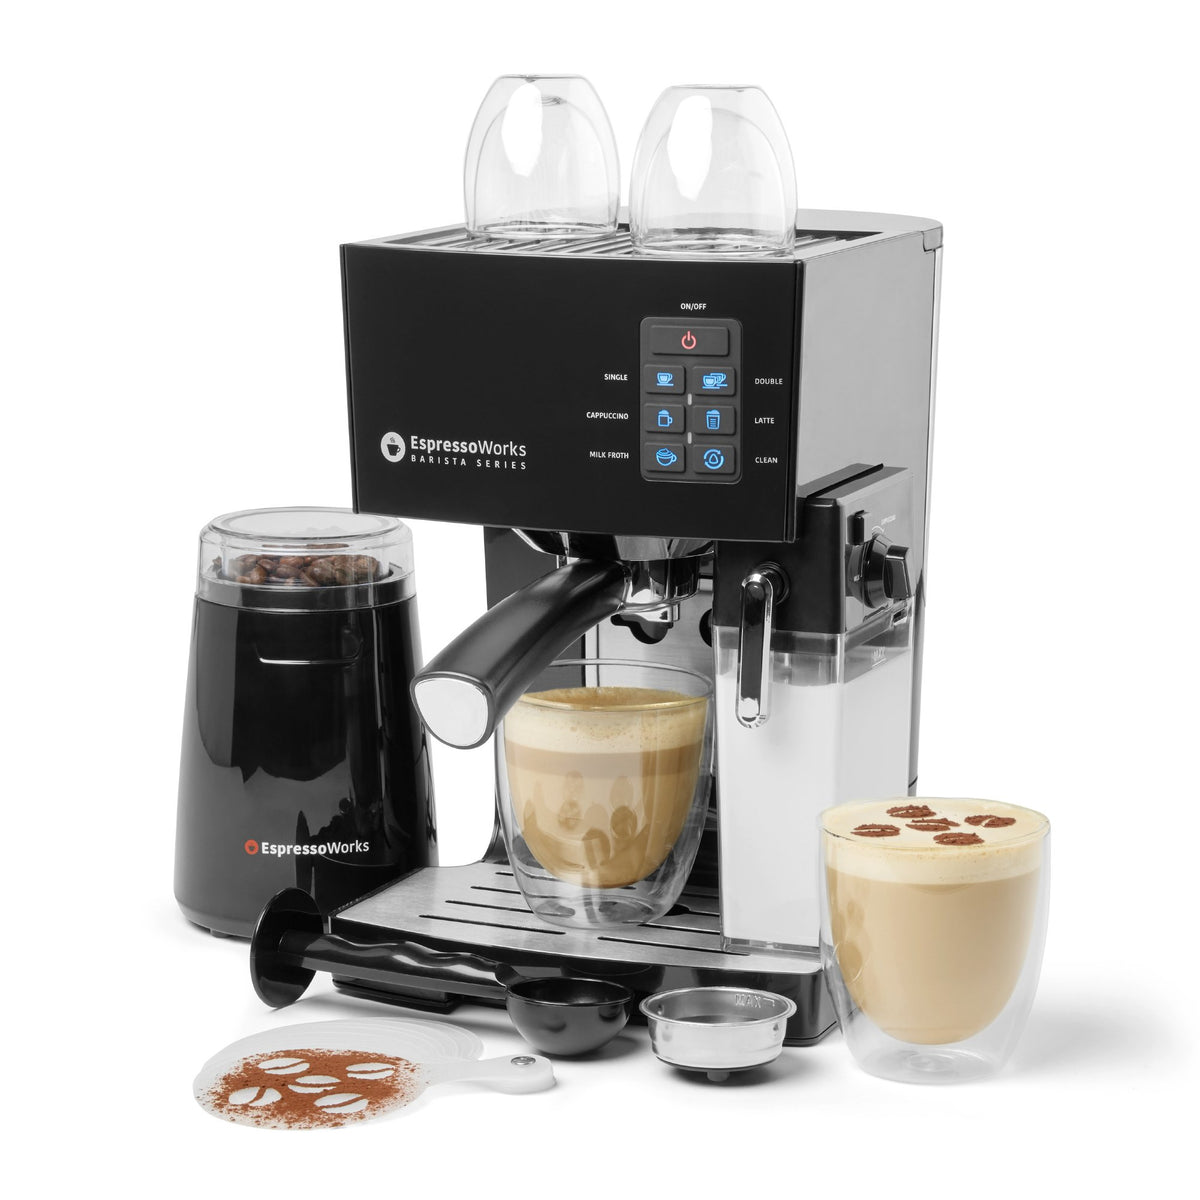 Replacement Water Tank only compatible with the EspressoWorks 10pc 19-bar Espresso and Cappuccino Maker Set